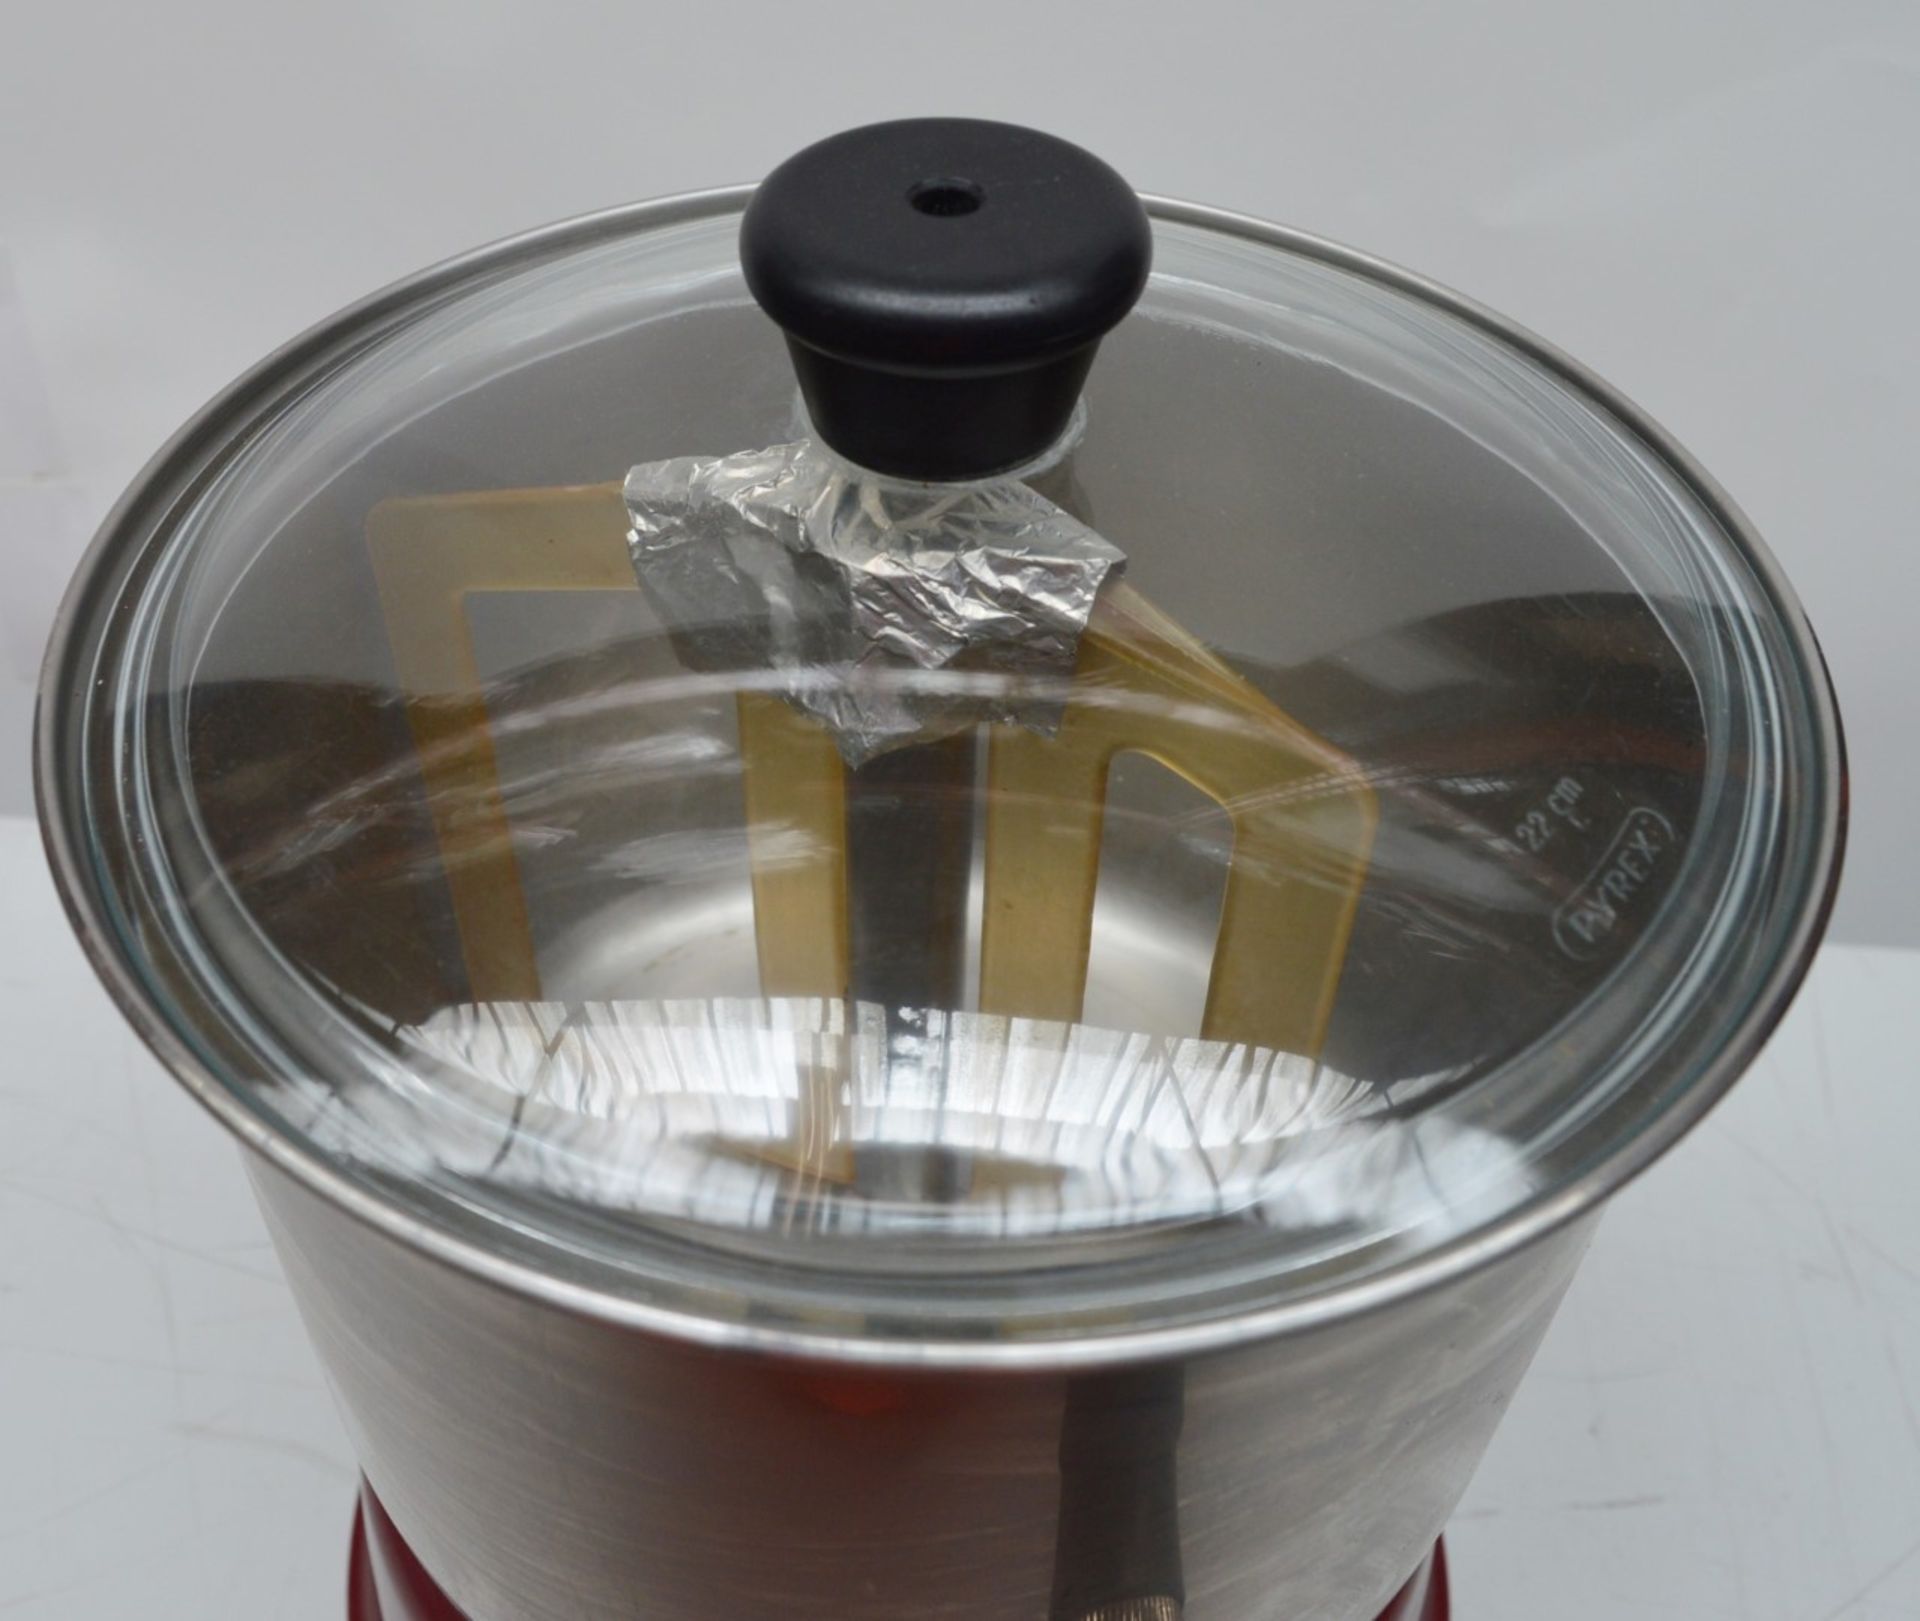 1 x SMP Hot Wonder Drinks Dispenser - Suitable For Hot Chocolate, Coffee, Hot Milk, Soups and - Image 4 of 6